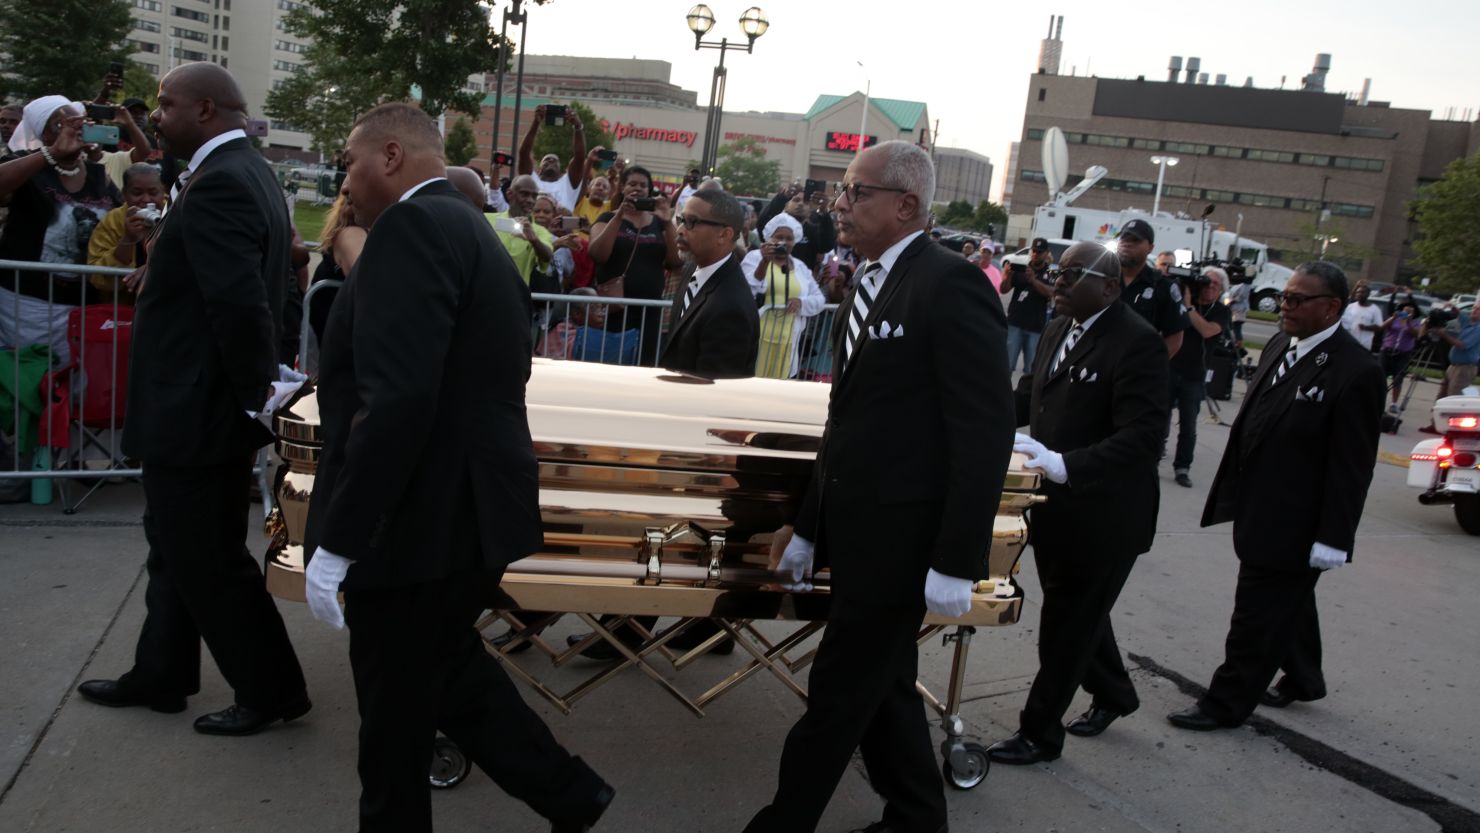 The casket of late Aretha Franklin arrives at the Charles H. Wright Museum of African American History for a viewing on August 28, 2018 in Detroit, Michigan. 